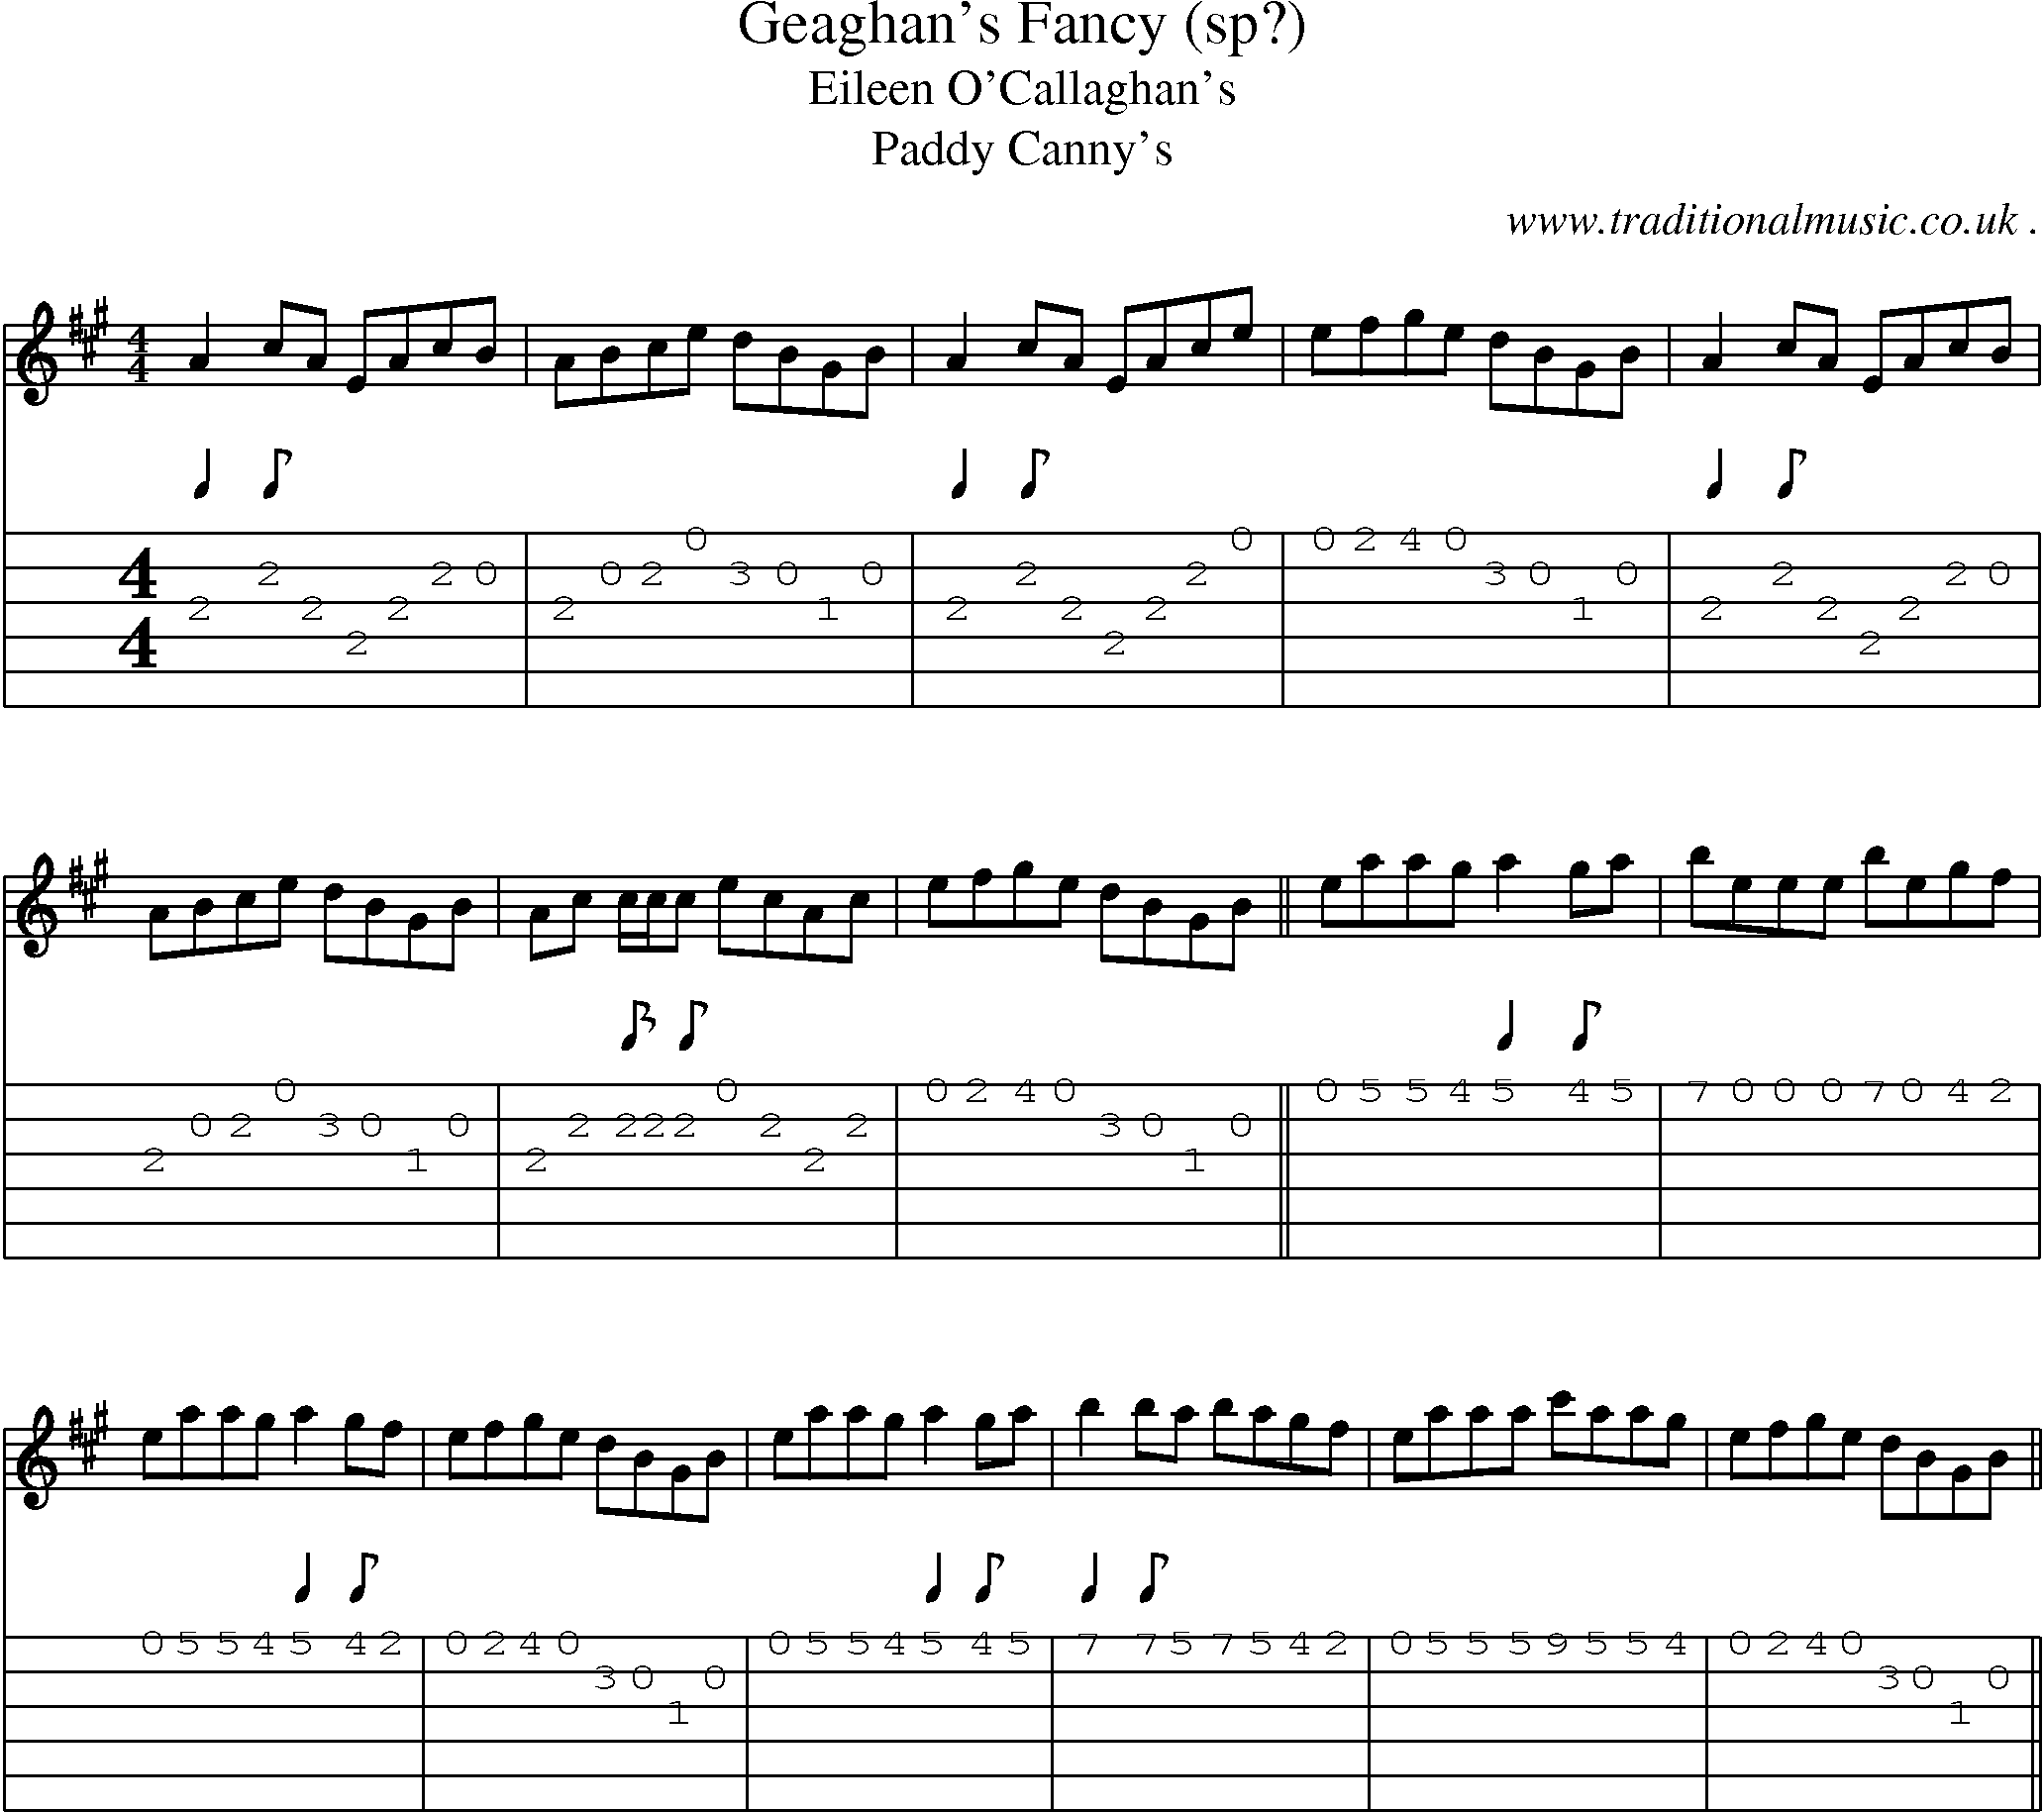 Sheet-Music and Guitar Tabs for Geaghans Fancy (sp)